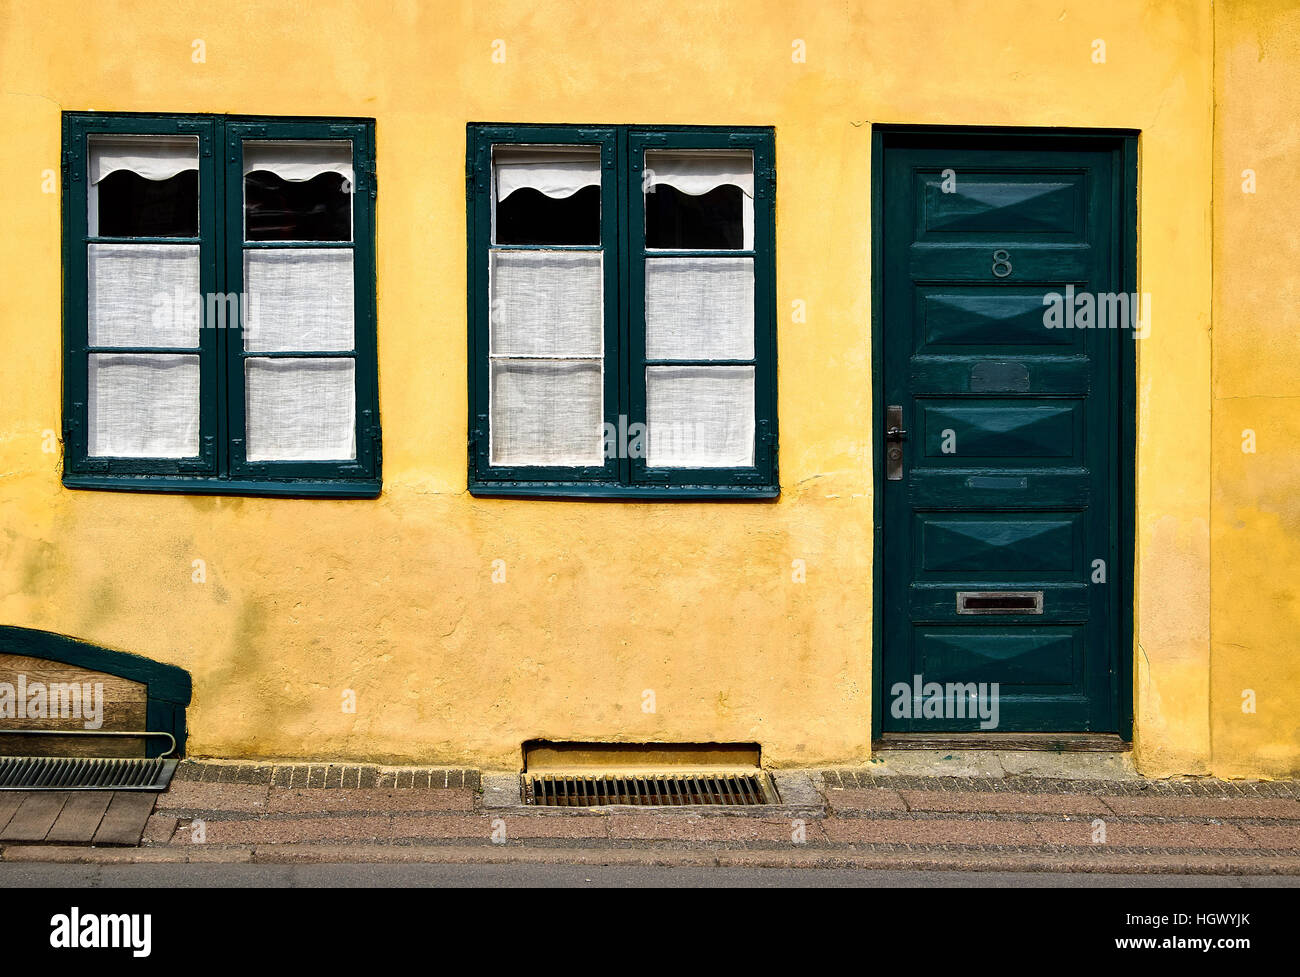 The facade of an old town house, in Elsinore Denmark, with yellow plastered walls and green painted windows and door Stock Photo